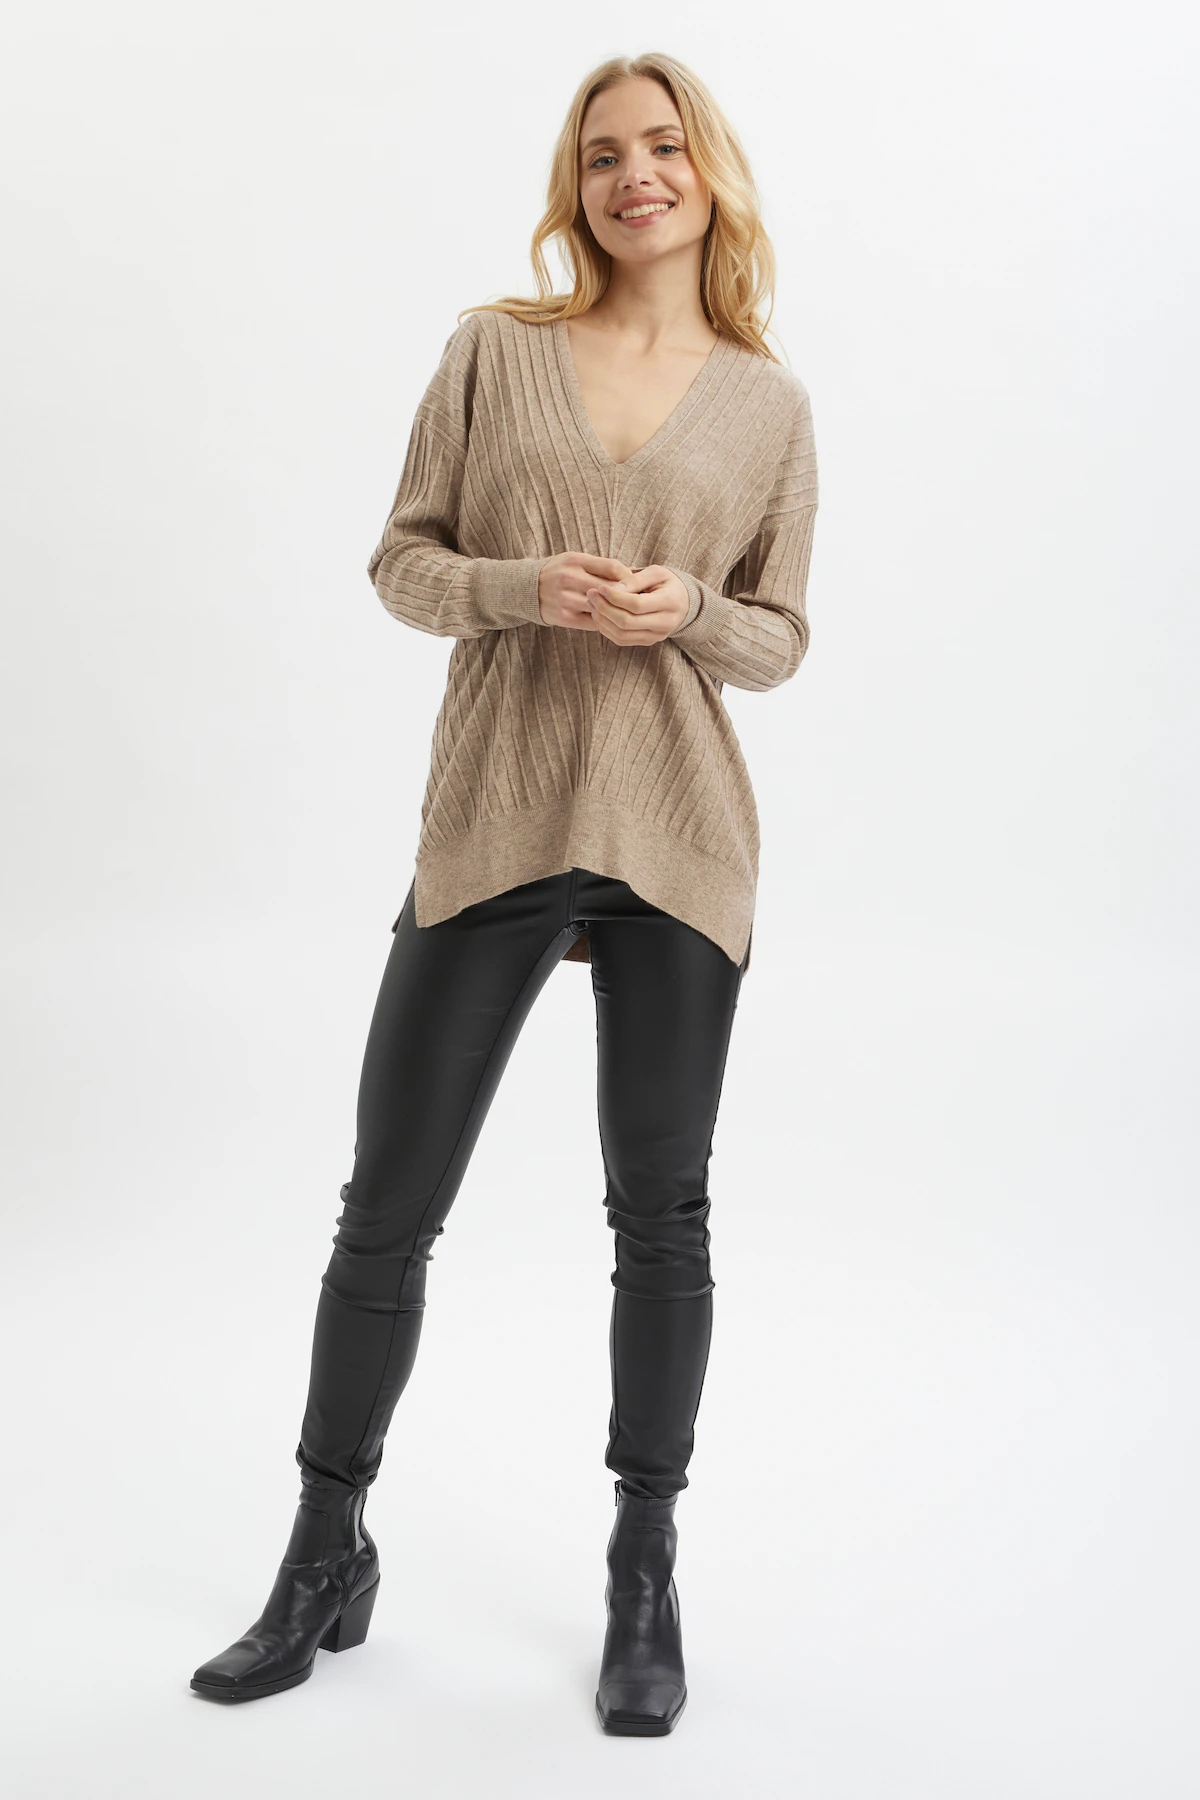 Knits for Women ( Save up to 50% ) - Big selection - Buy right here